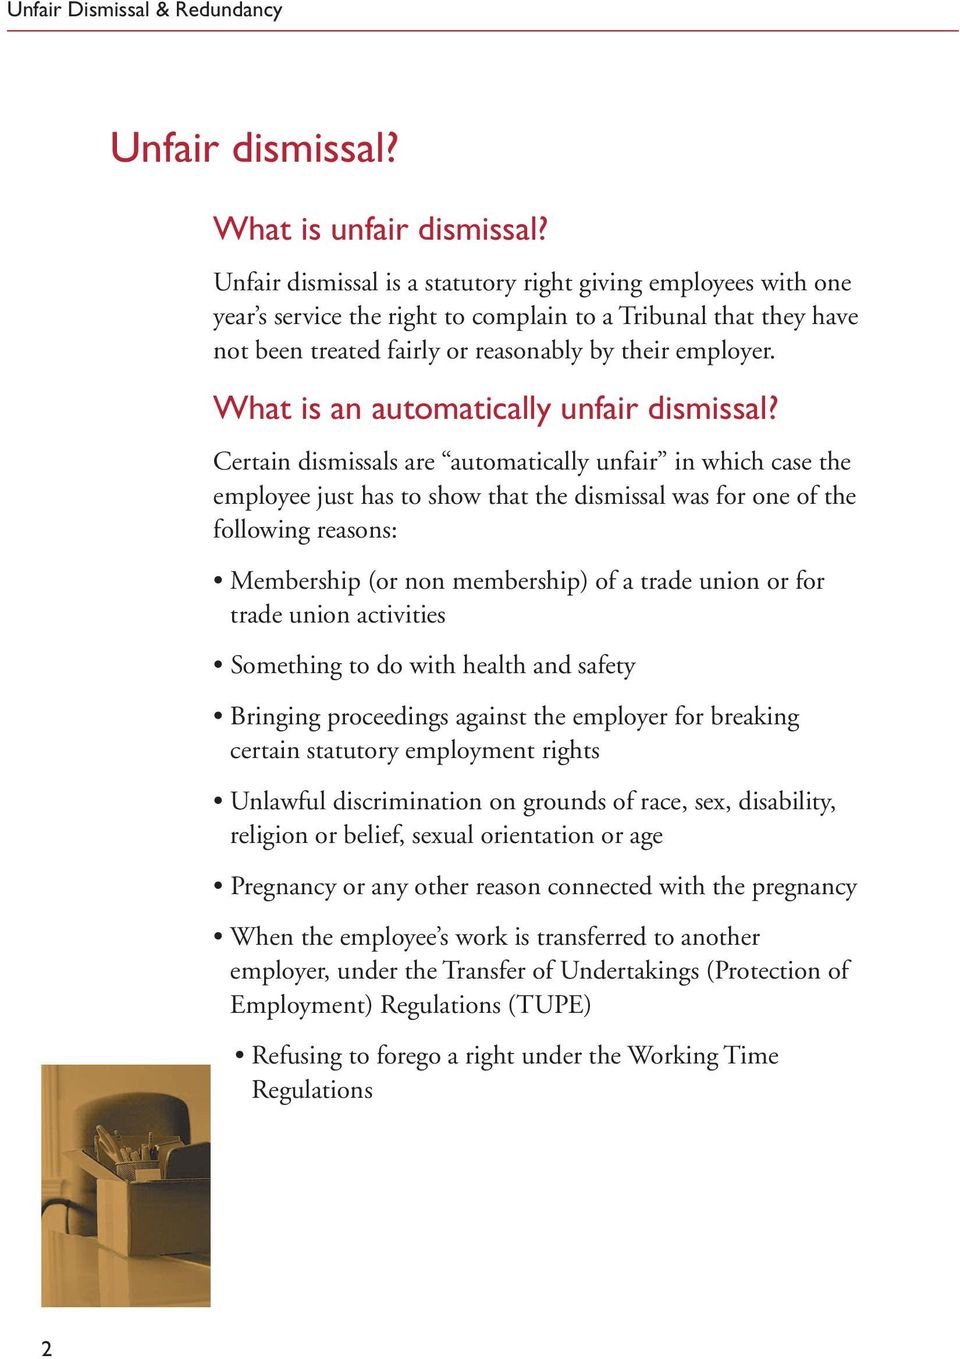 What is an automatically unfair dismissal?